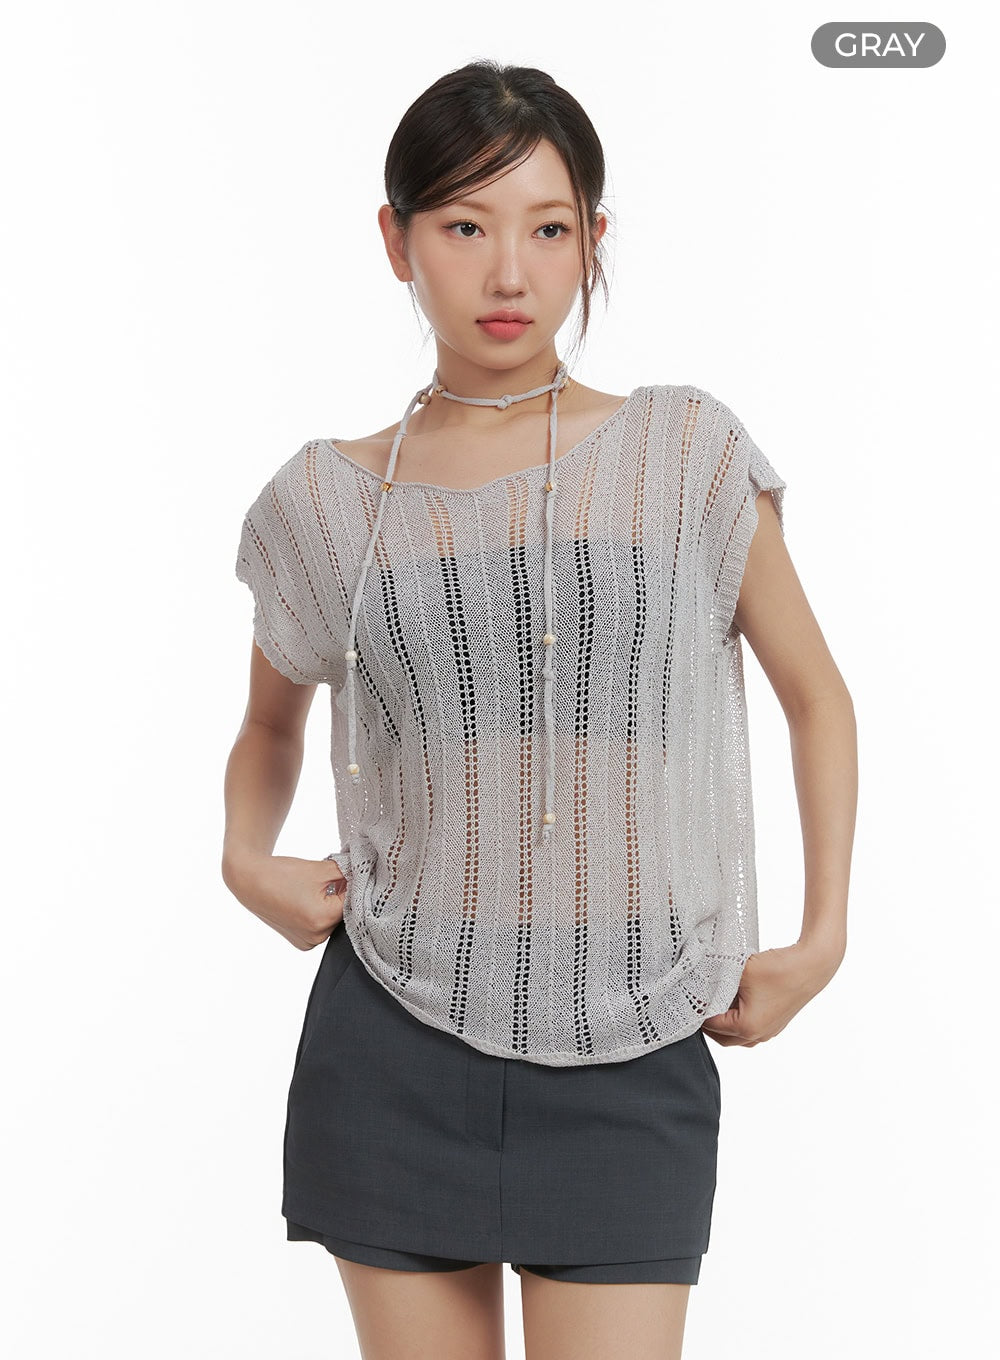 hollow-out-knit-sleeveless-cl418 / Gray